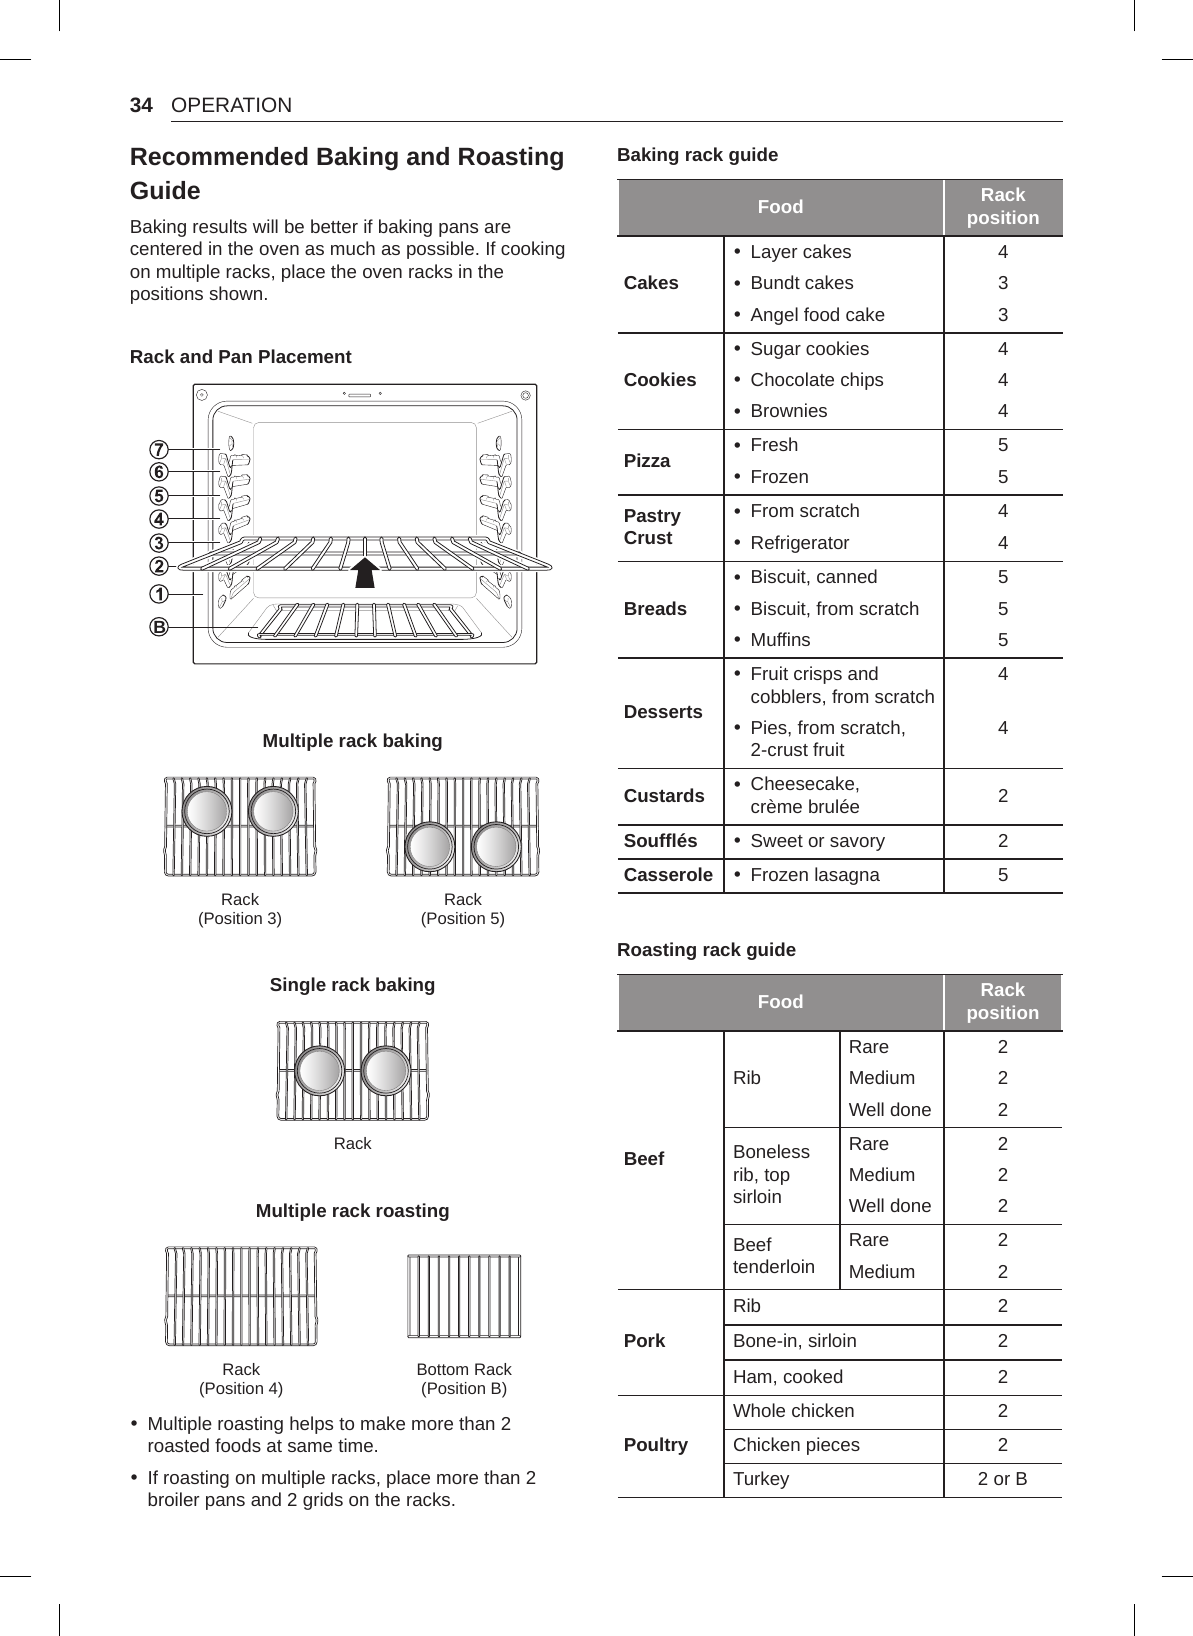 34 OPERATIONRecommended Baking and Roasting GuideBaking results will be better if baking pans are centered in the oven as much as possible. If cooking on multiple racks, place the oven racks in the positions shown.Rack and Pan PlacementBMultiple rack bakingRack (Position 3) Rack (Position 5)Single rack bakingRackMultiple rack roastingRack (Position 4) Bottom Rack (Position B) •Multiple roasting helps to make more than 2 roasted foods at same time. •If roasting on multiple racks, place more than 2 broiler pans and 2 grids on the racks.Baking rack guideFood Rack positionCakes •Layer cakes •Bundt cakes •Angel food cake433Cookies •Sugar cookies •Chocolate chips •Brownies444Pizza  •Fresh •Frozen55Pastry Crust •From scratch •Refrigerator44Breads •Biscuit, canned •Biscuit, from scratch •Muffins555Desserts •Fruit crisps and cobblers, from scratch •Pies, from scratch, 2-crust fruit4 4Custards  •Cheesecake,  crème brulée 2Soufflés  •Sweet or savory 2Casserole  •Frozen lasagna 5Roasting rack guideFood Rack positionBeefRibRareMediumWell done222Boneless rib, top sirloinRareMediumWell done222Beef tenderloinRareMedium22PorkRib 2Bone-in, sirloin 2Ham, cooked 2PoultryWhole chicken 2Chicken pieces 2Turkey 2 or B